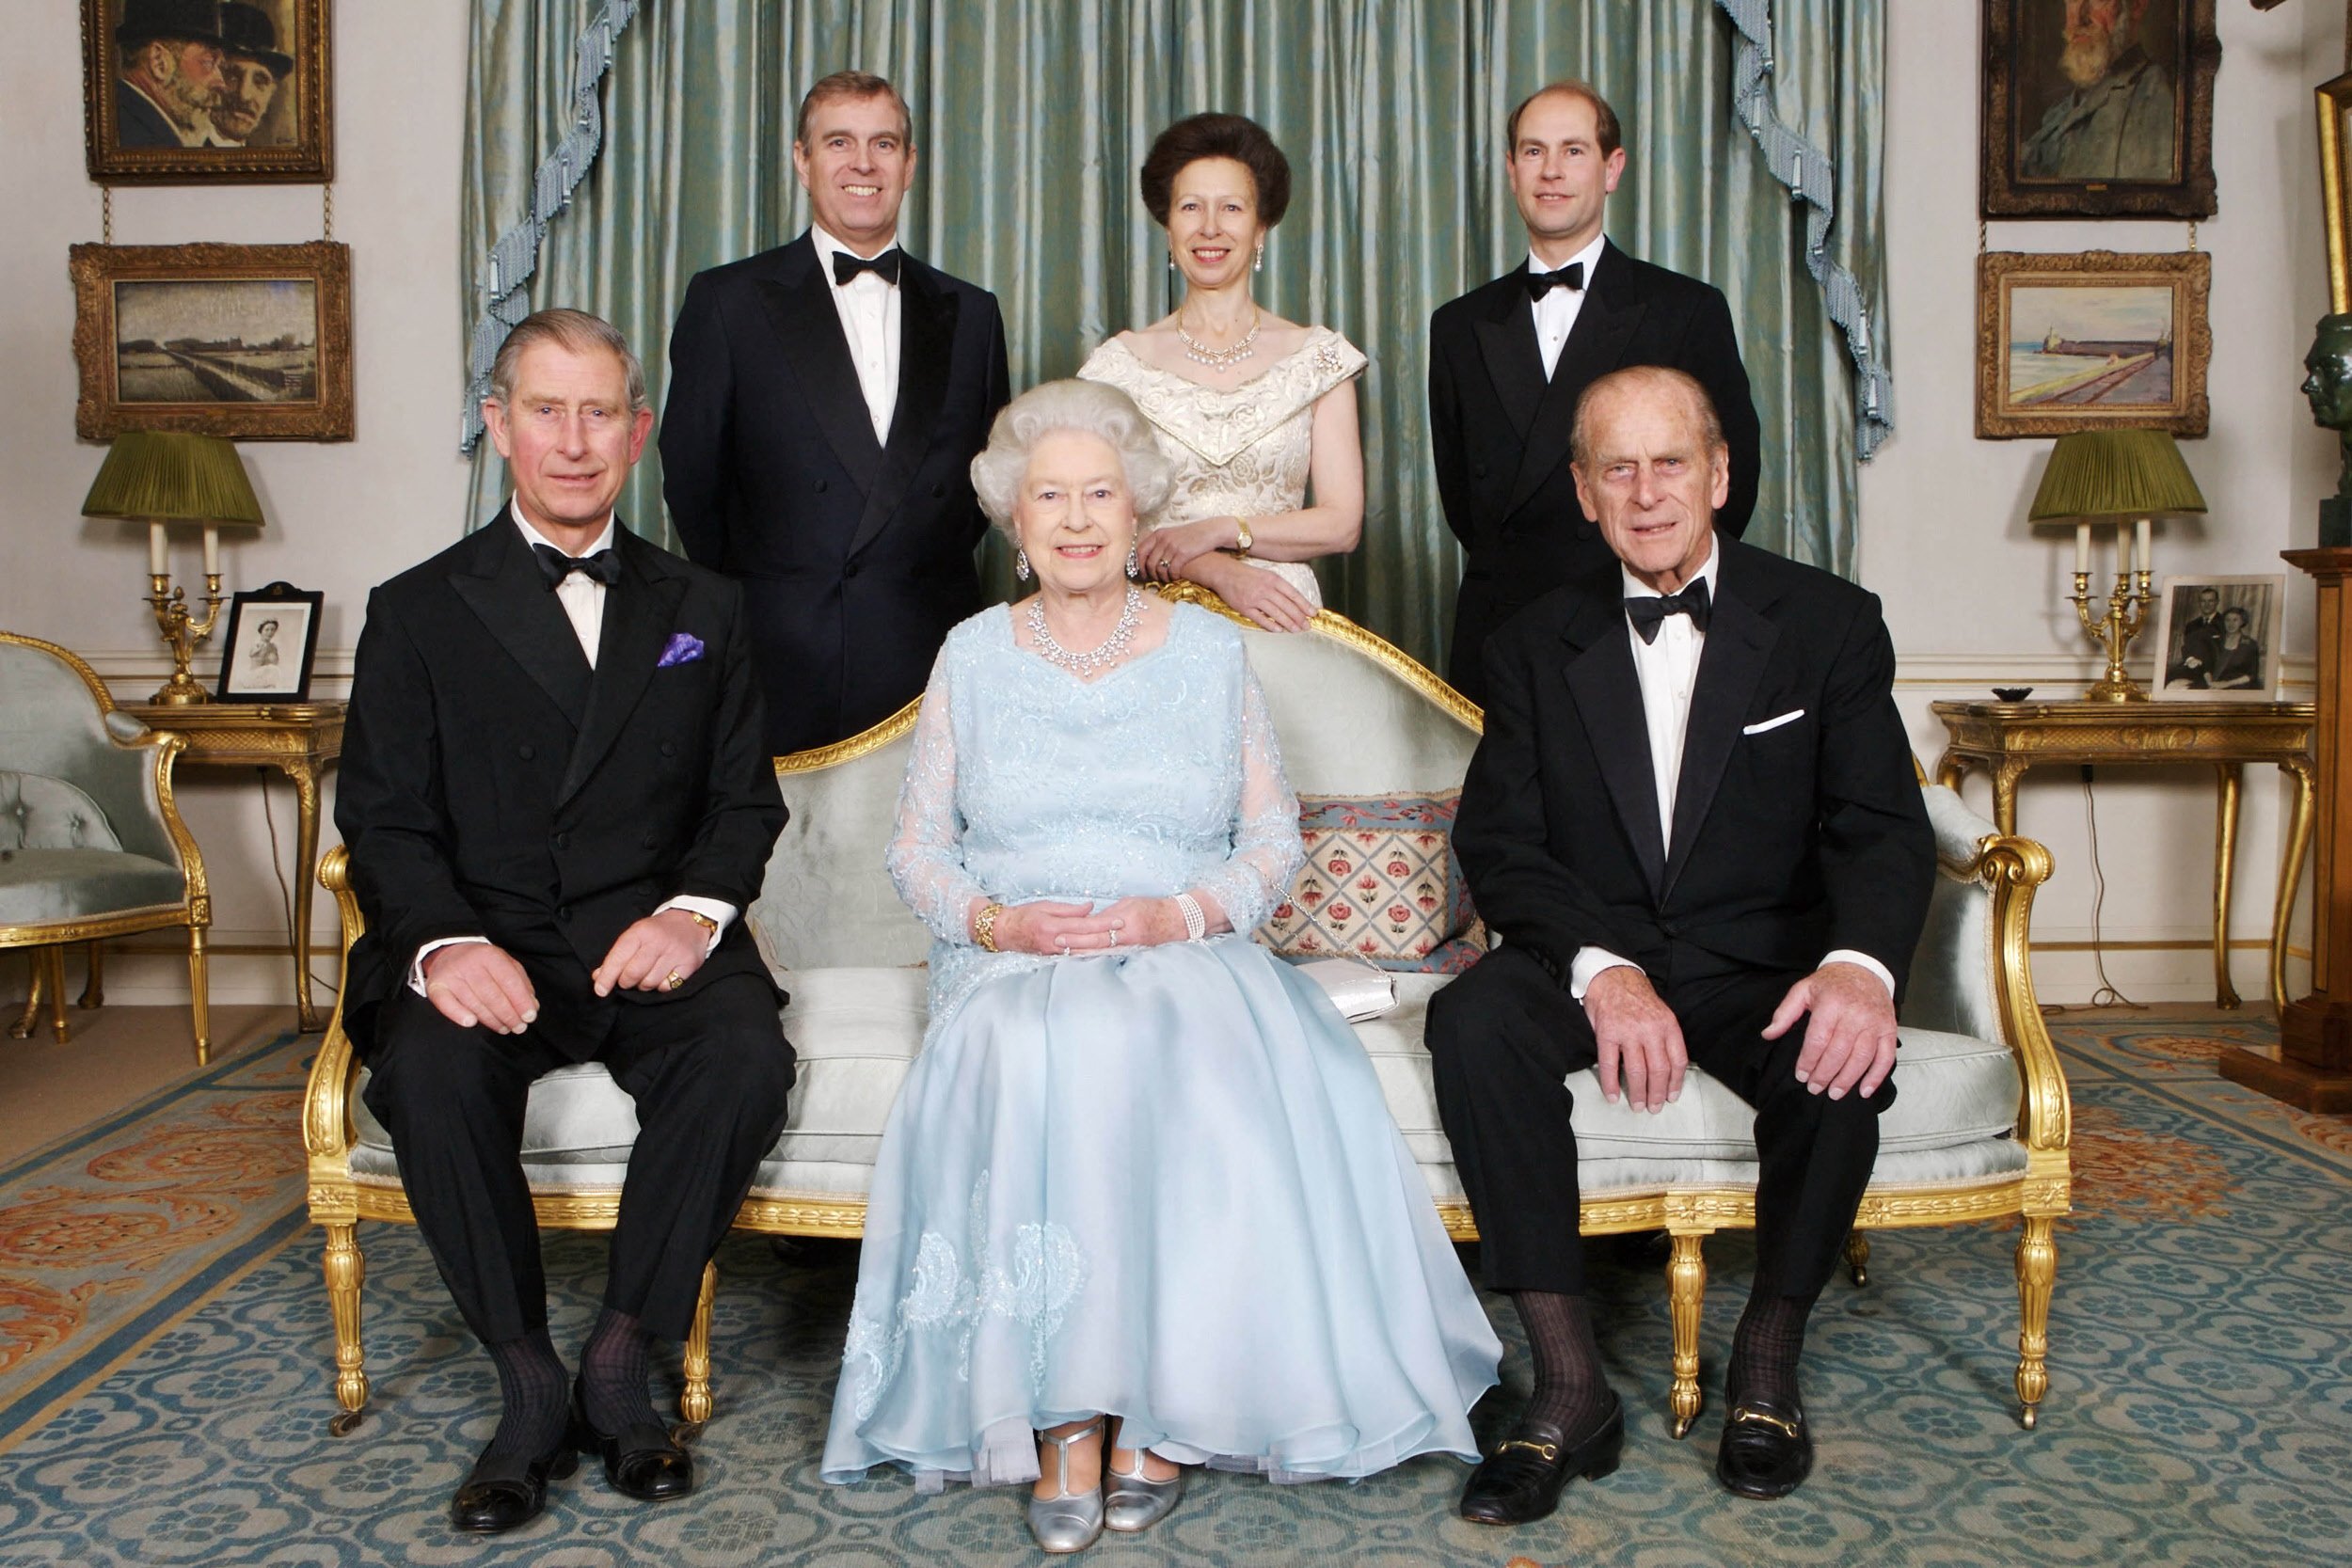 Queen Elizabeth II and Prince Philip are joined at Clarence House in London by Prince Charles, Prince Edward, Princess Anne and Prince Andrew on the occasion of a dinner hosted by HRH The Prince of Wales and HRH The Duchess of Cornwall to mark the forthcoming Diamond Wedding Anniversary of The Queen and The Duke, 18 November 2007. | Source: Getty Images